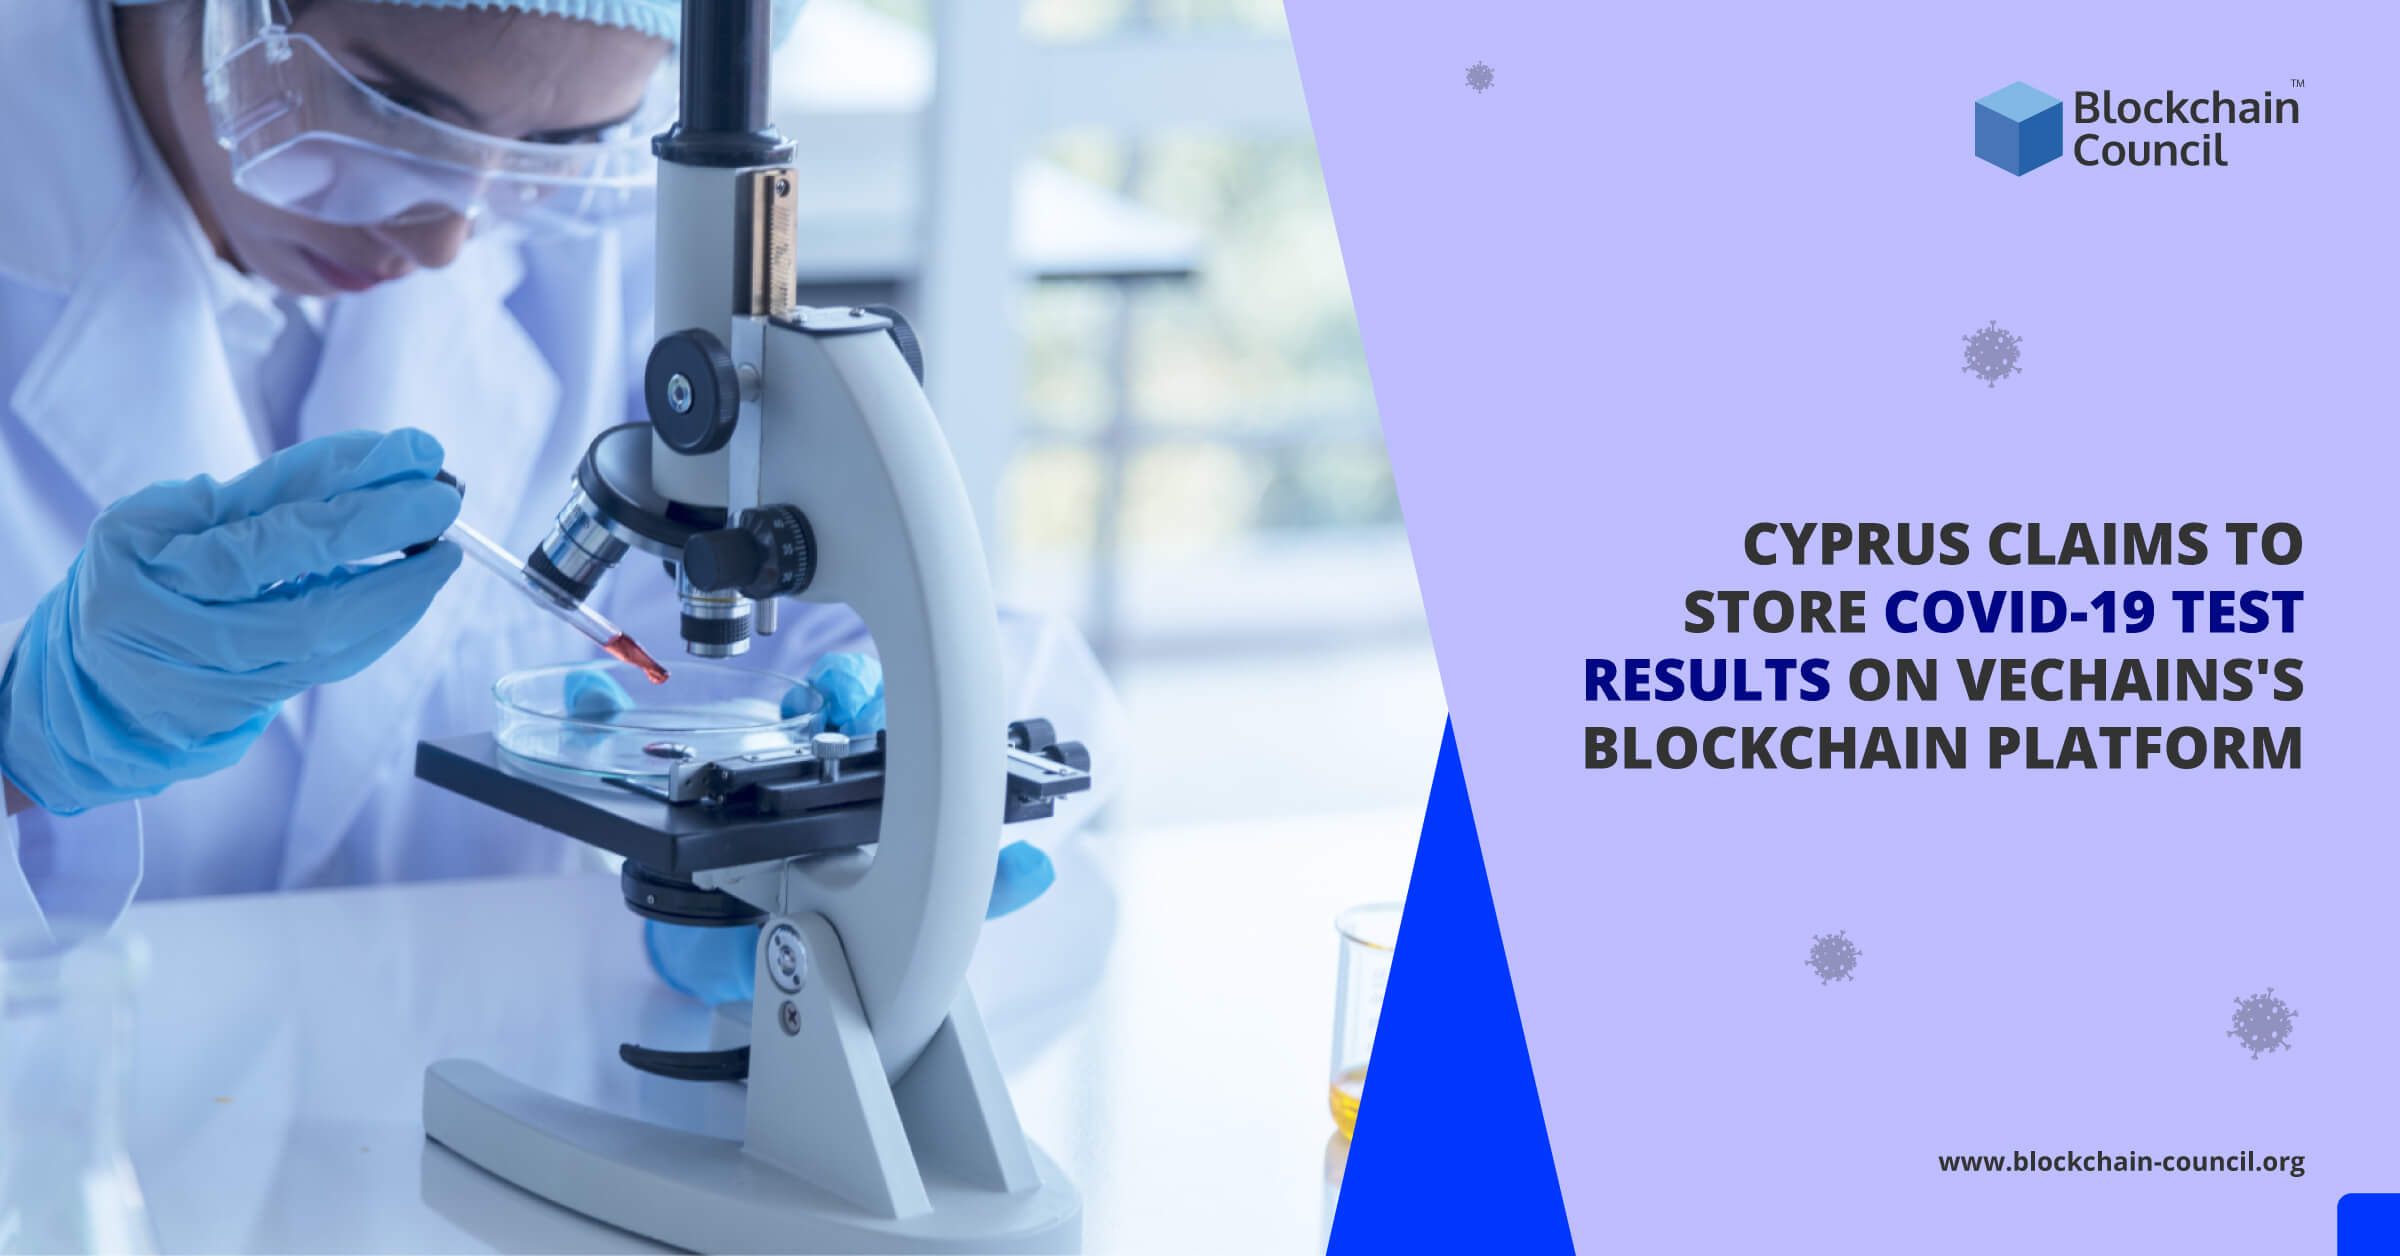 Cyprus Claims to Store COVID-19 Test Results on Vechains’s Blockchain Platform 